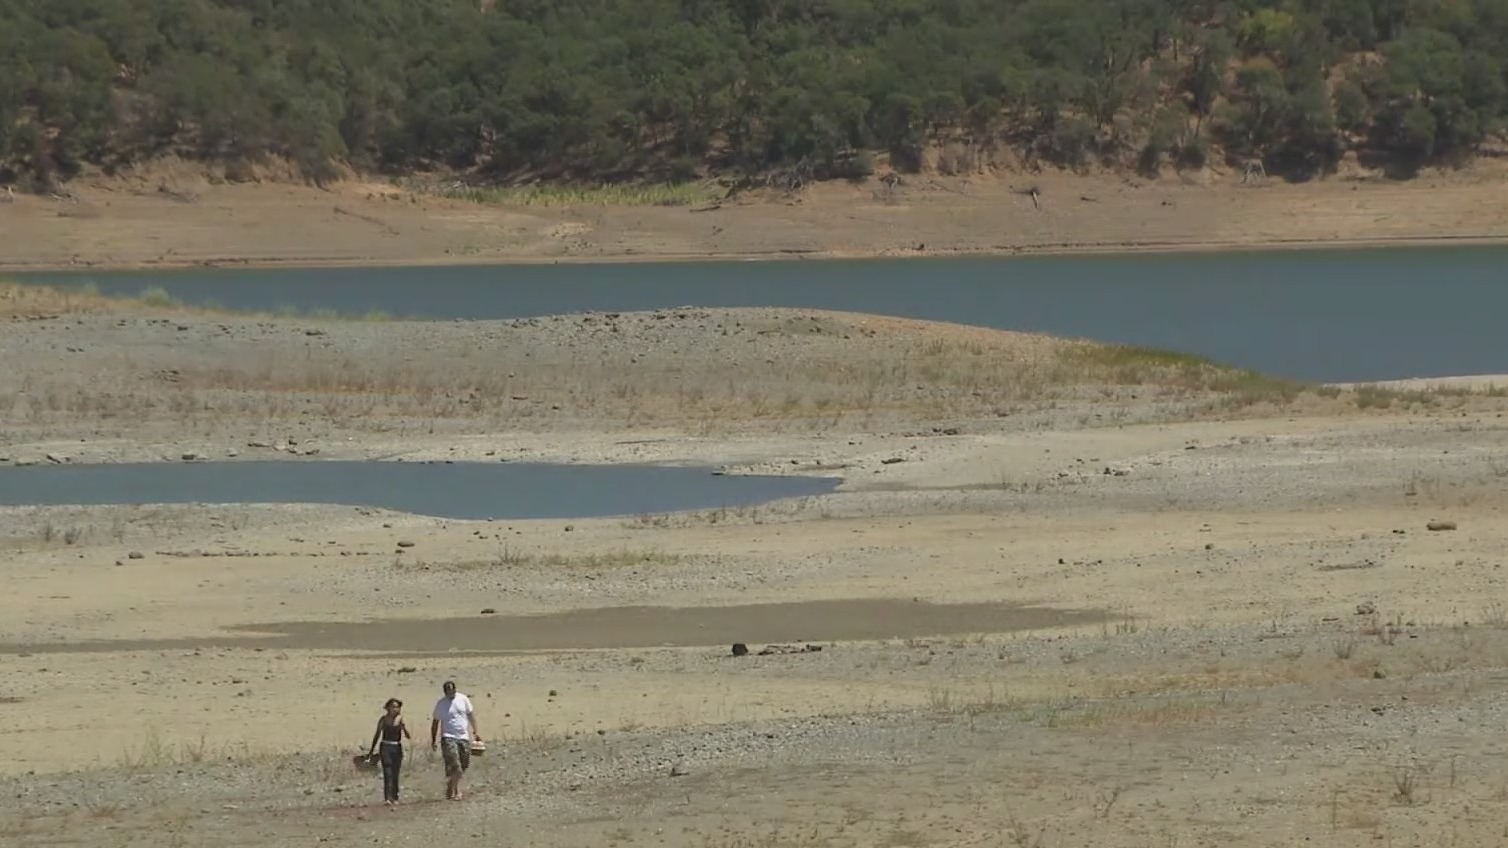 Lake Mendocino during drought conditions, June 14, 2021. (CBS)